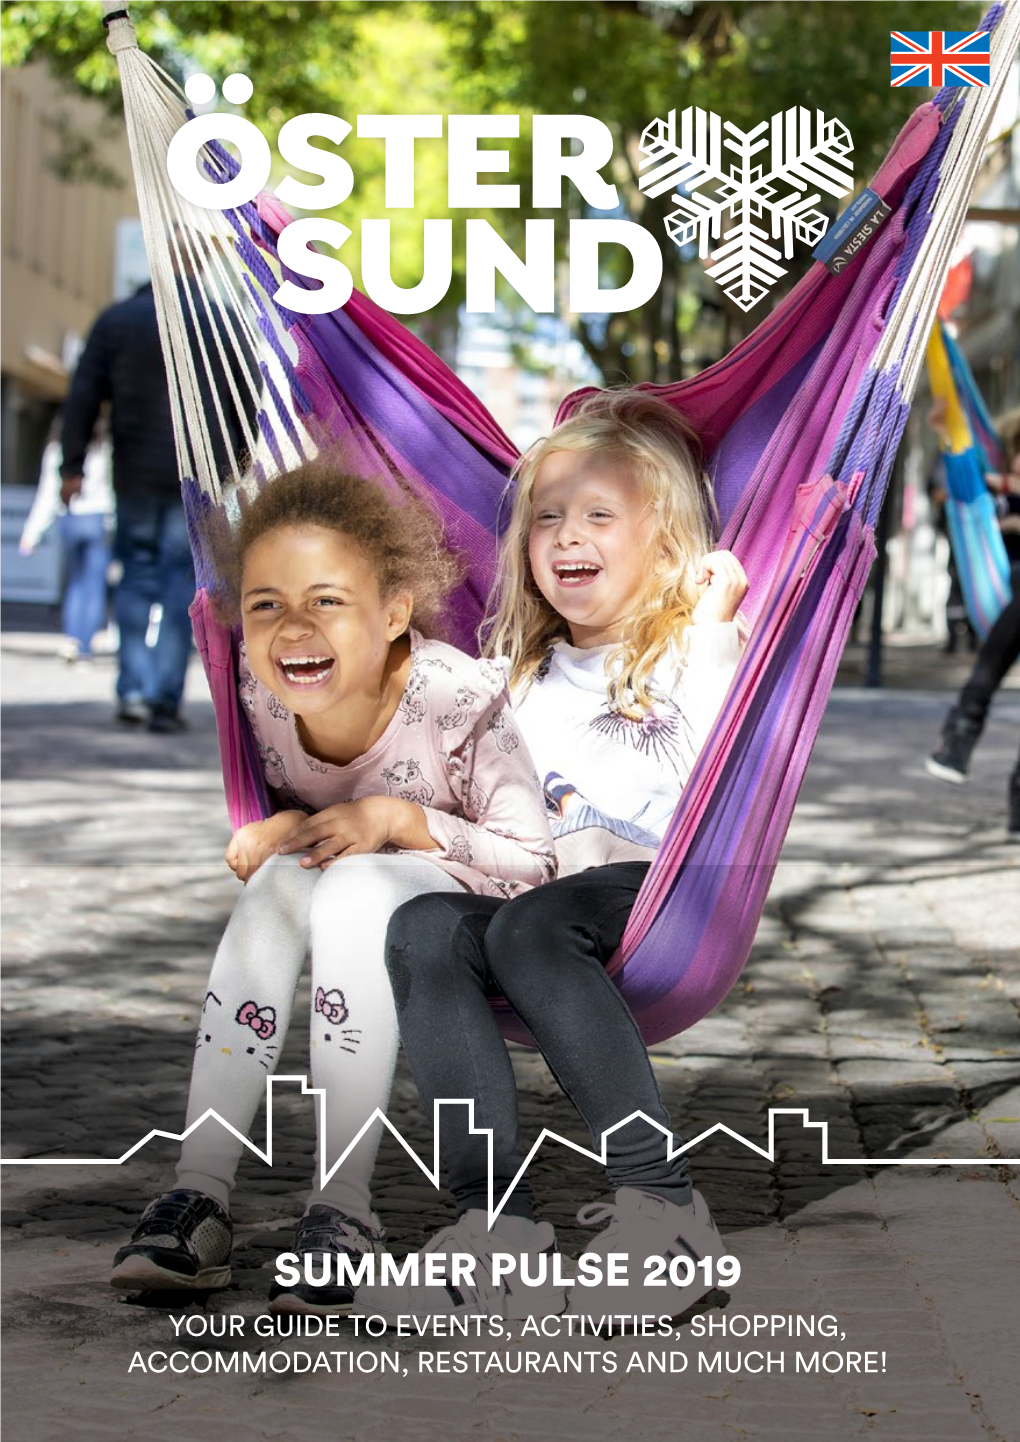 Summer Pulse 2019 Your Guide to Events, Activities, Shopping, Accommodation, Restaurants and Much More! 1 Simply, Welcome!